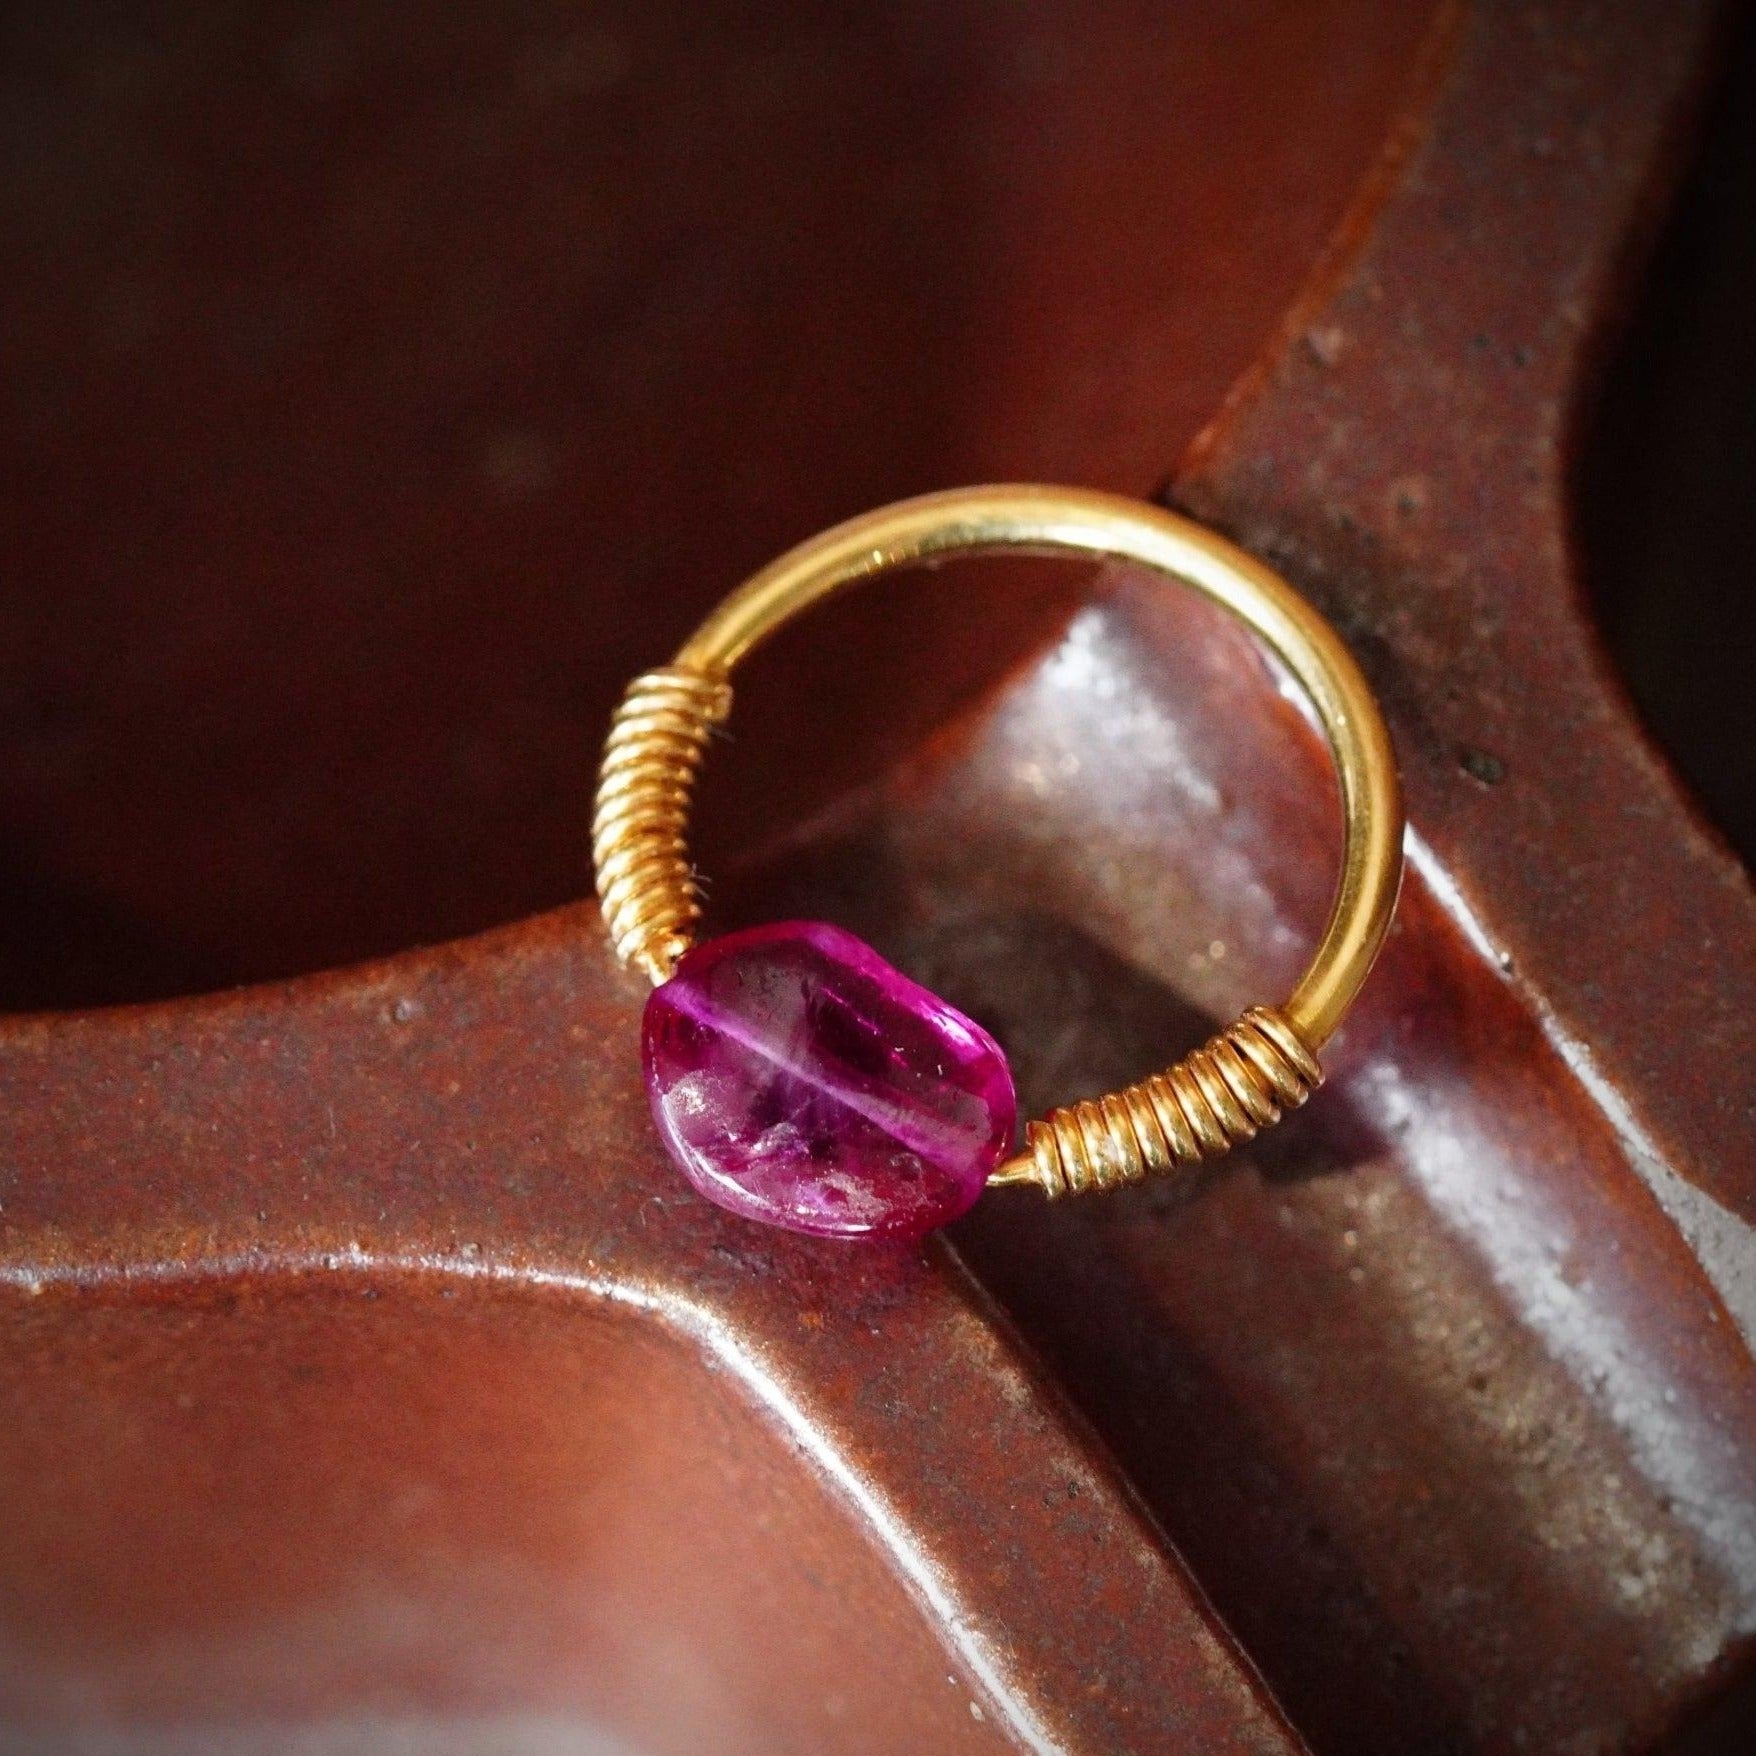 No Heat 2 CT Ruby Bead 18K Gold Handmade Ring in Suspended Setting by Jogani